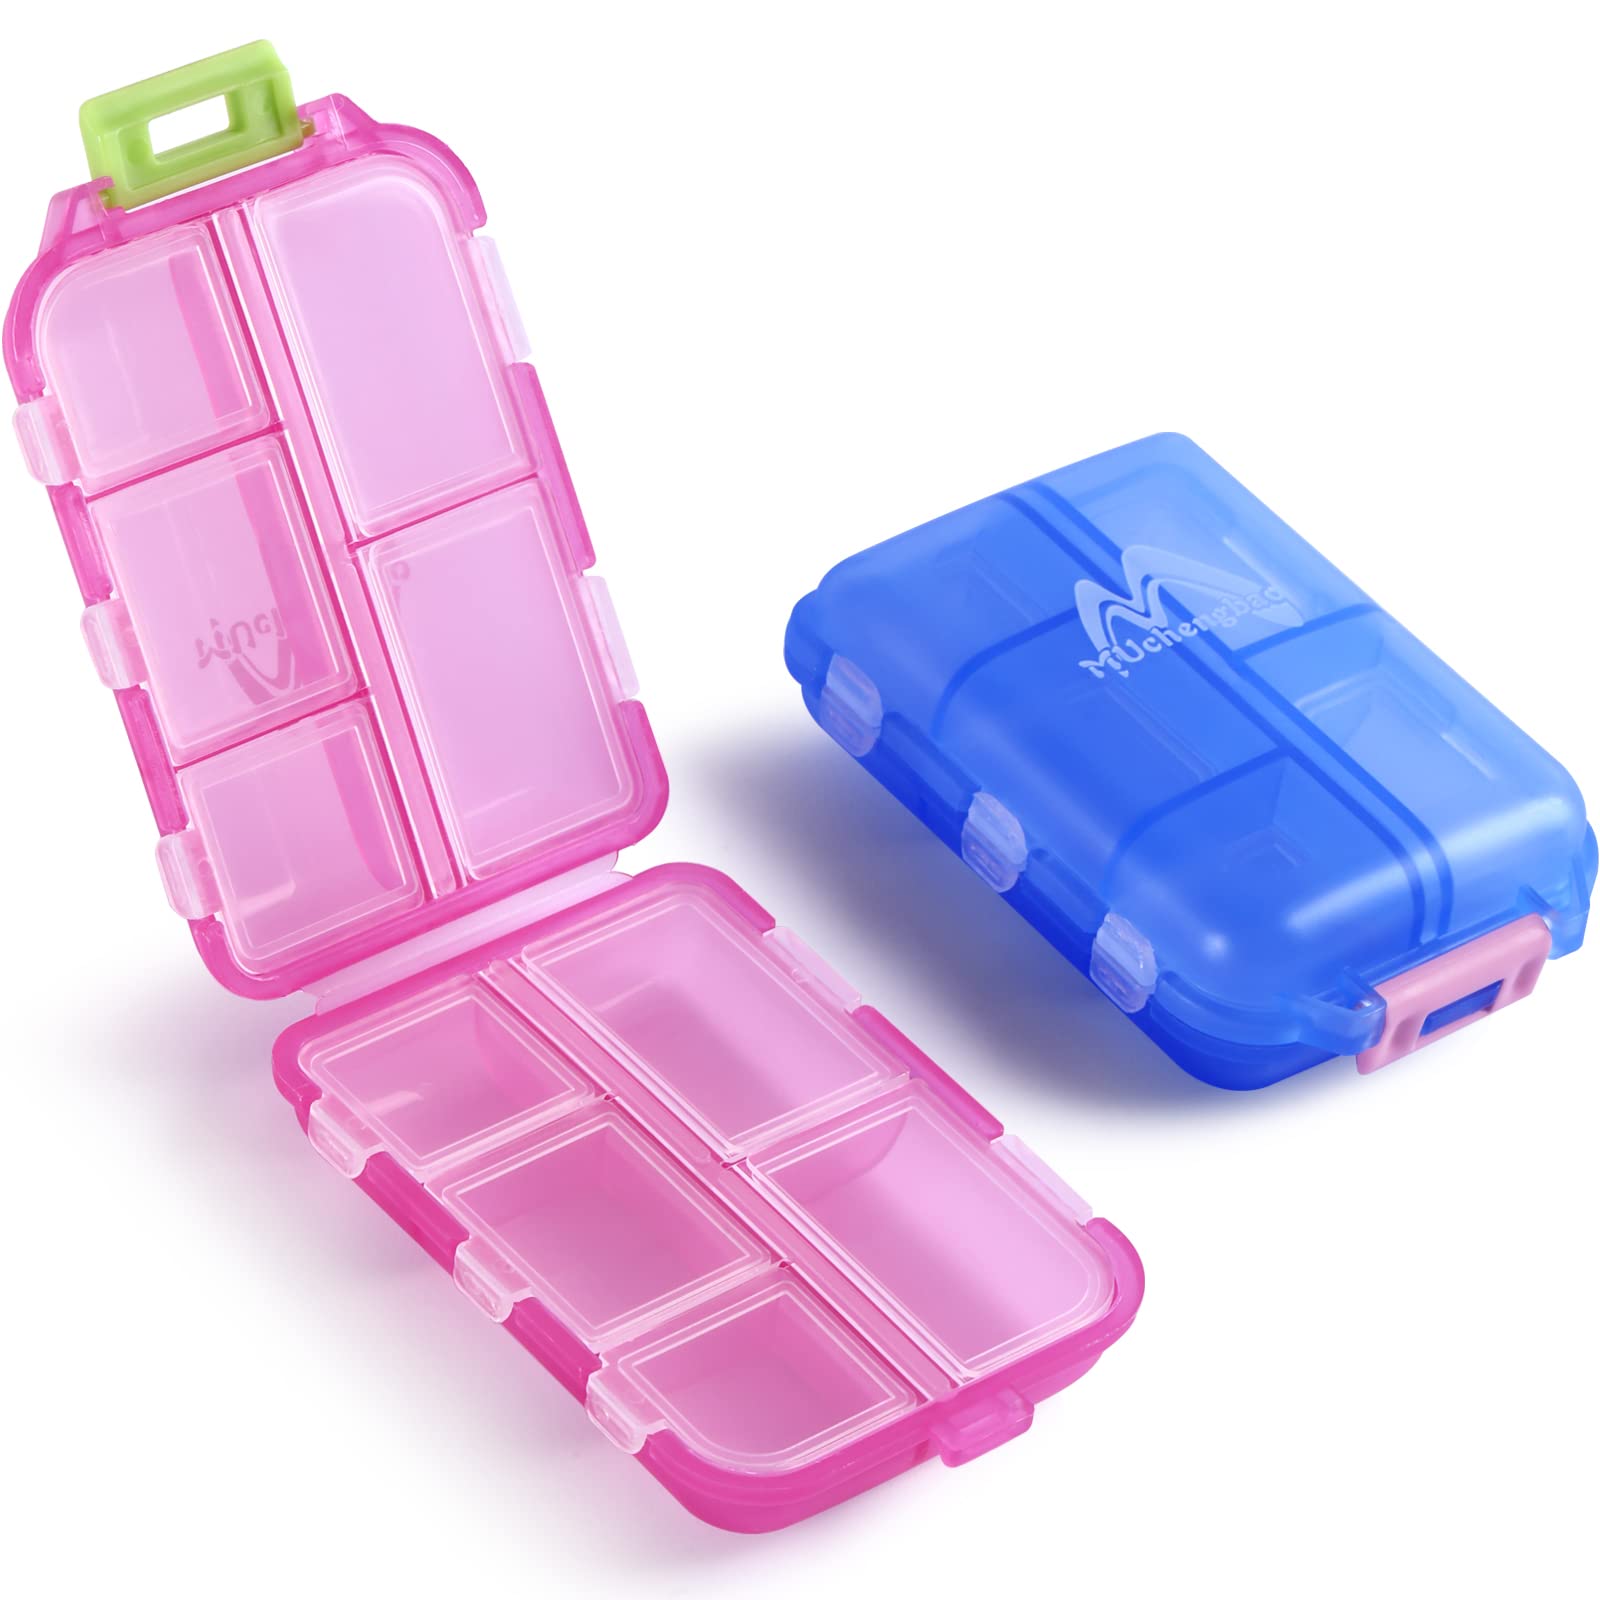 PACK4TRACK Pill Case - Waterproof Portable Travel Medicine India | Ubuy